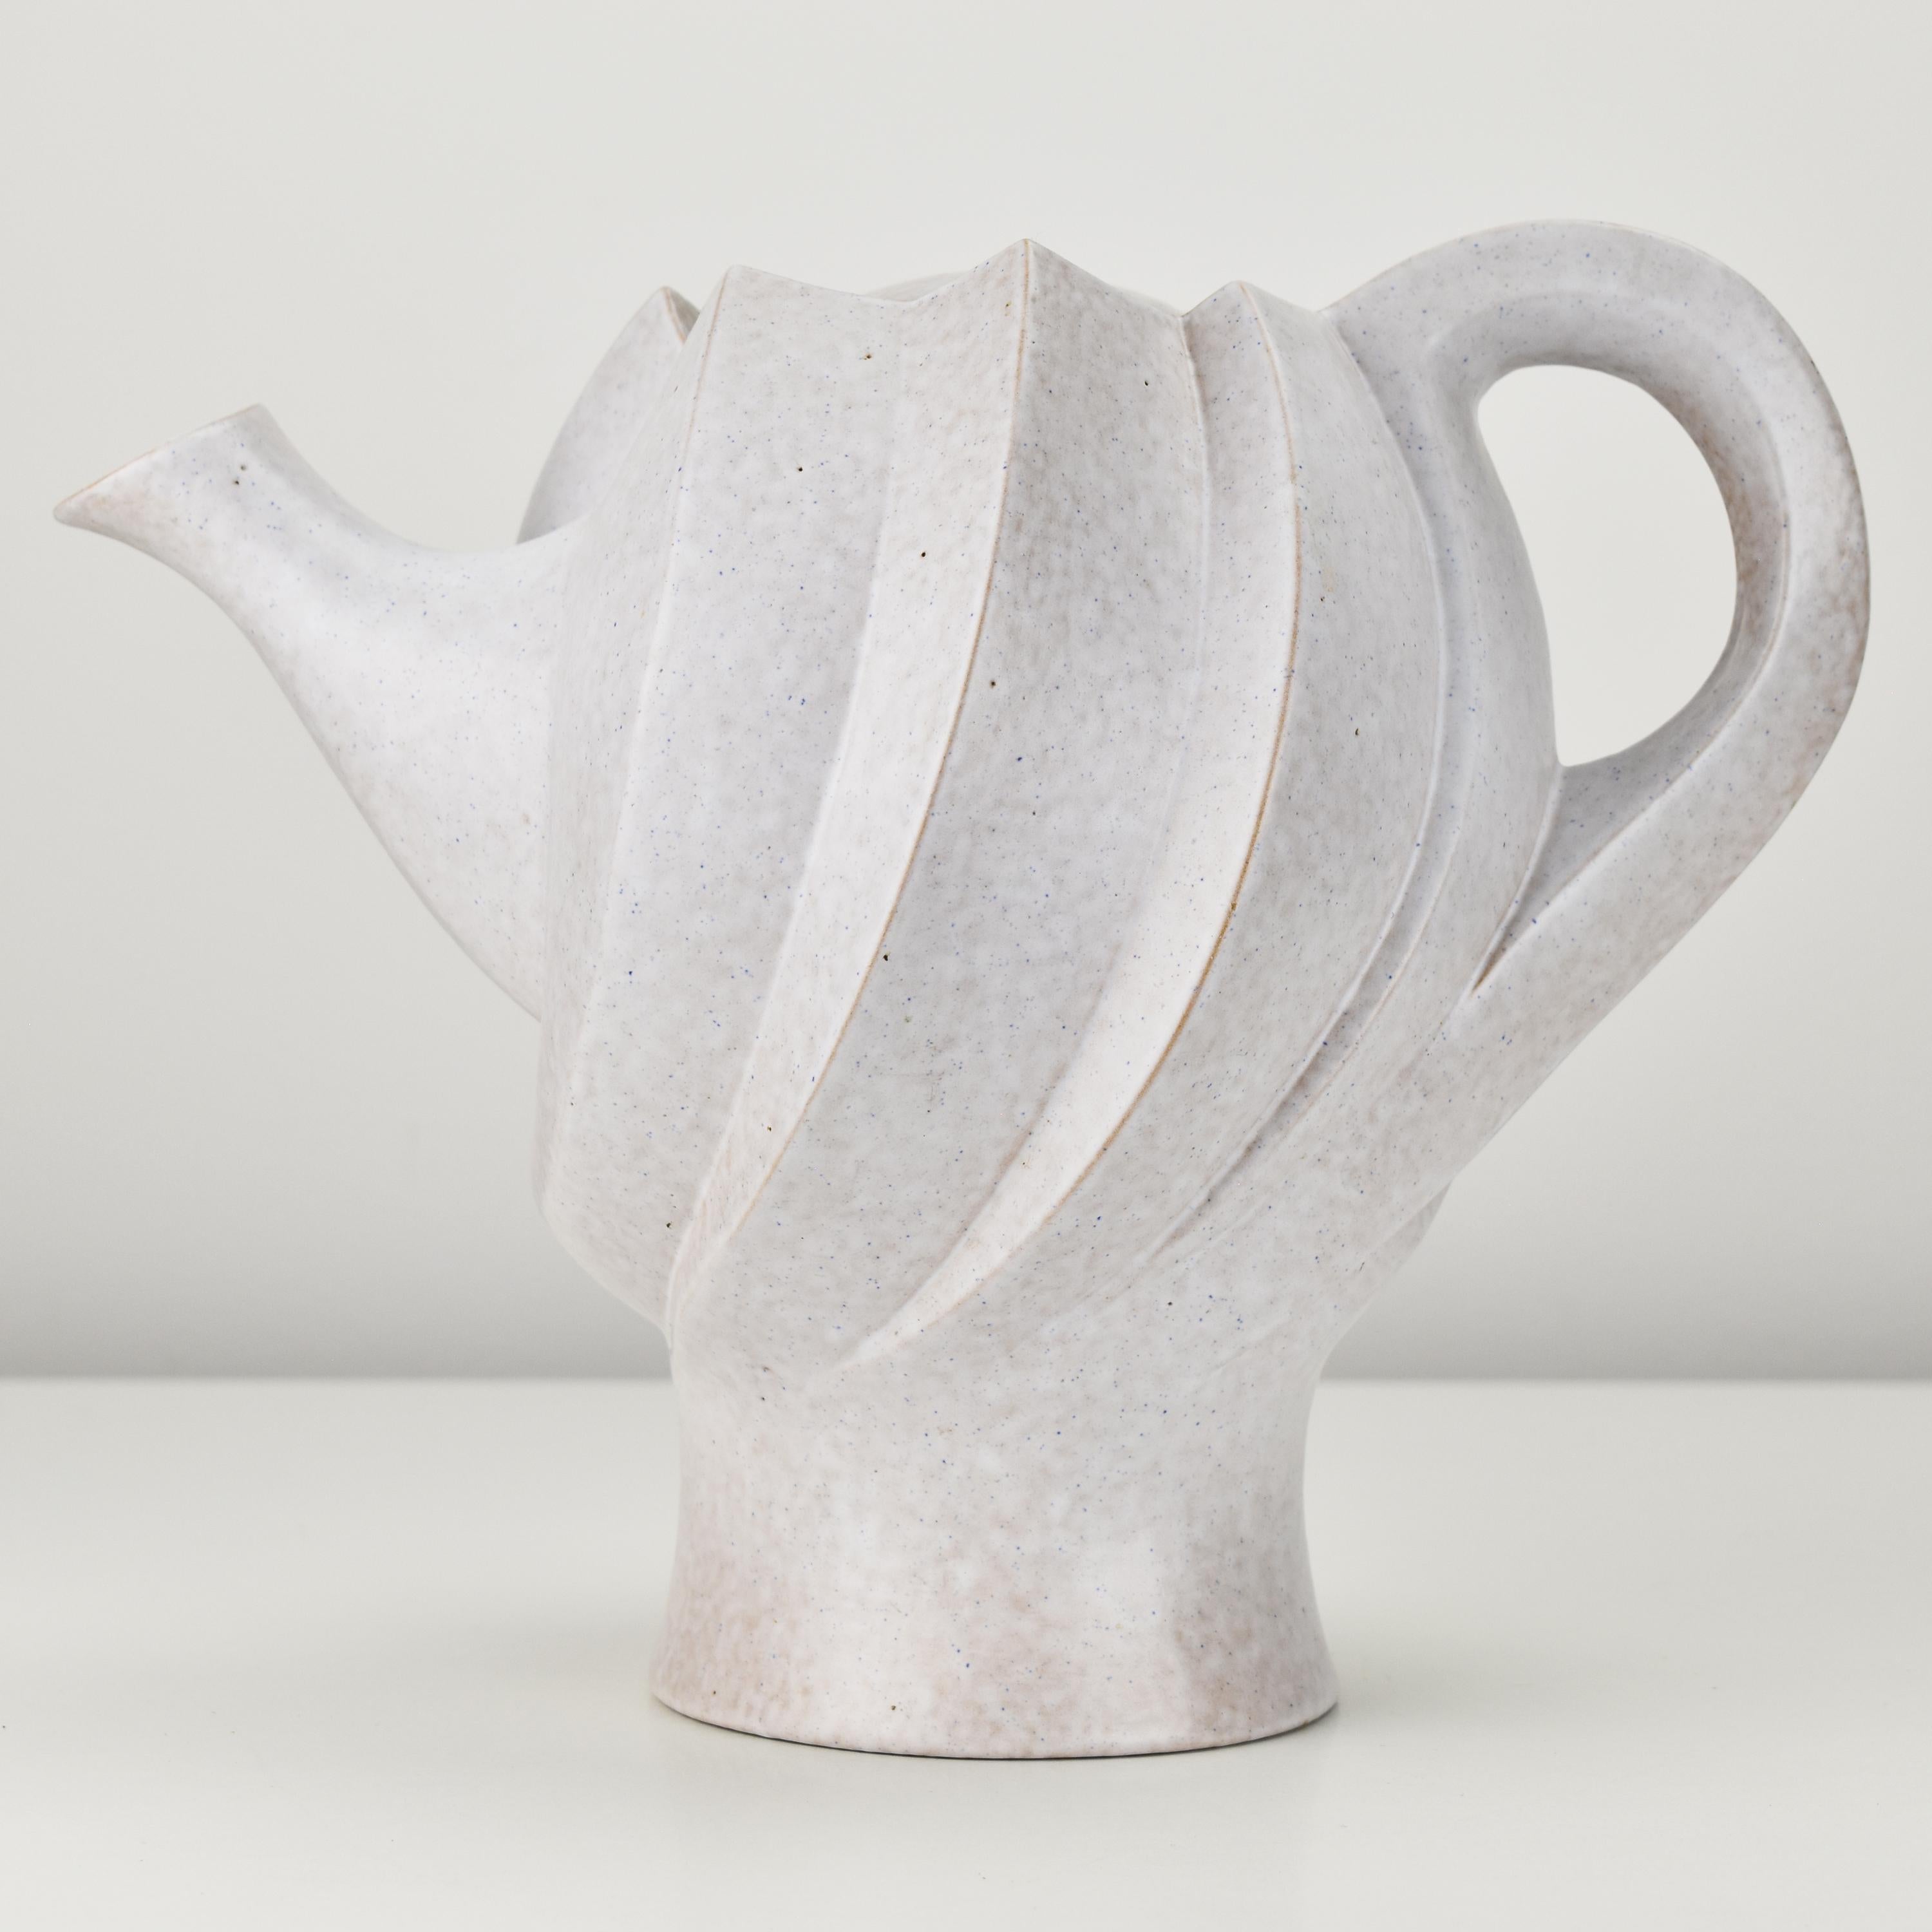 An unusual sculptural segmented teapot and remarkable piece of ceramic art, captivating with its unique design and artistic expression. Crafted from beige glazed ceramic, the teapot exudes an elegant and earthy charm that complements its distinct